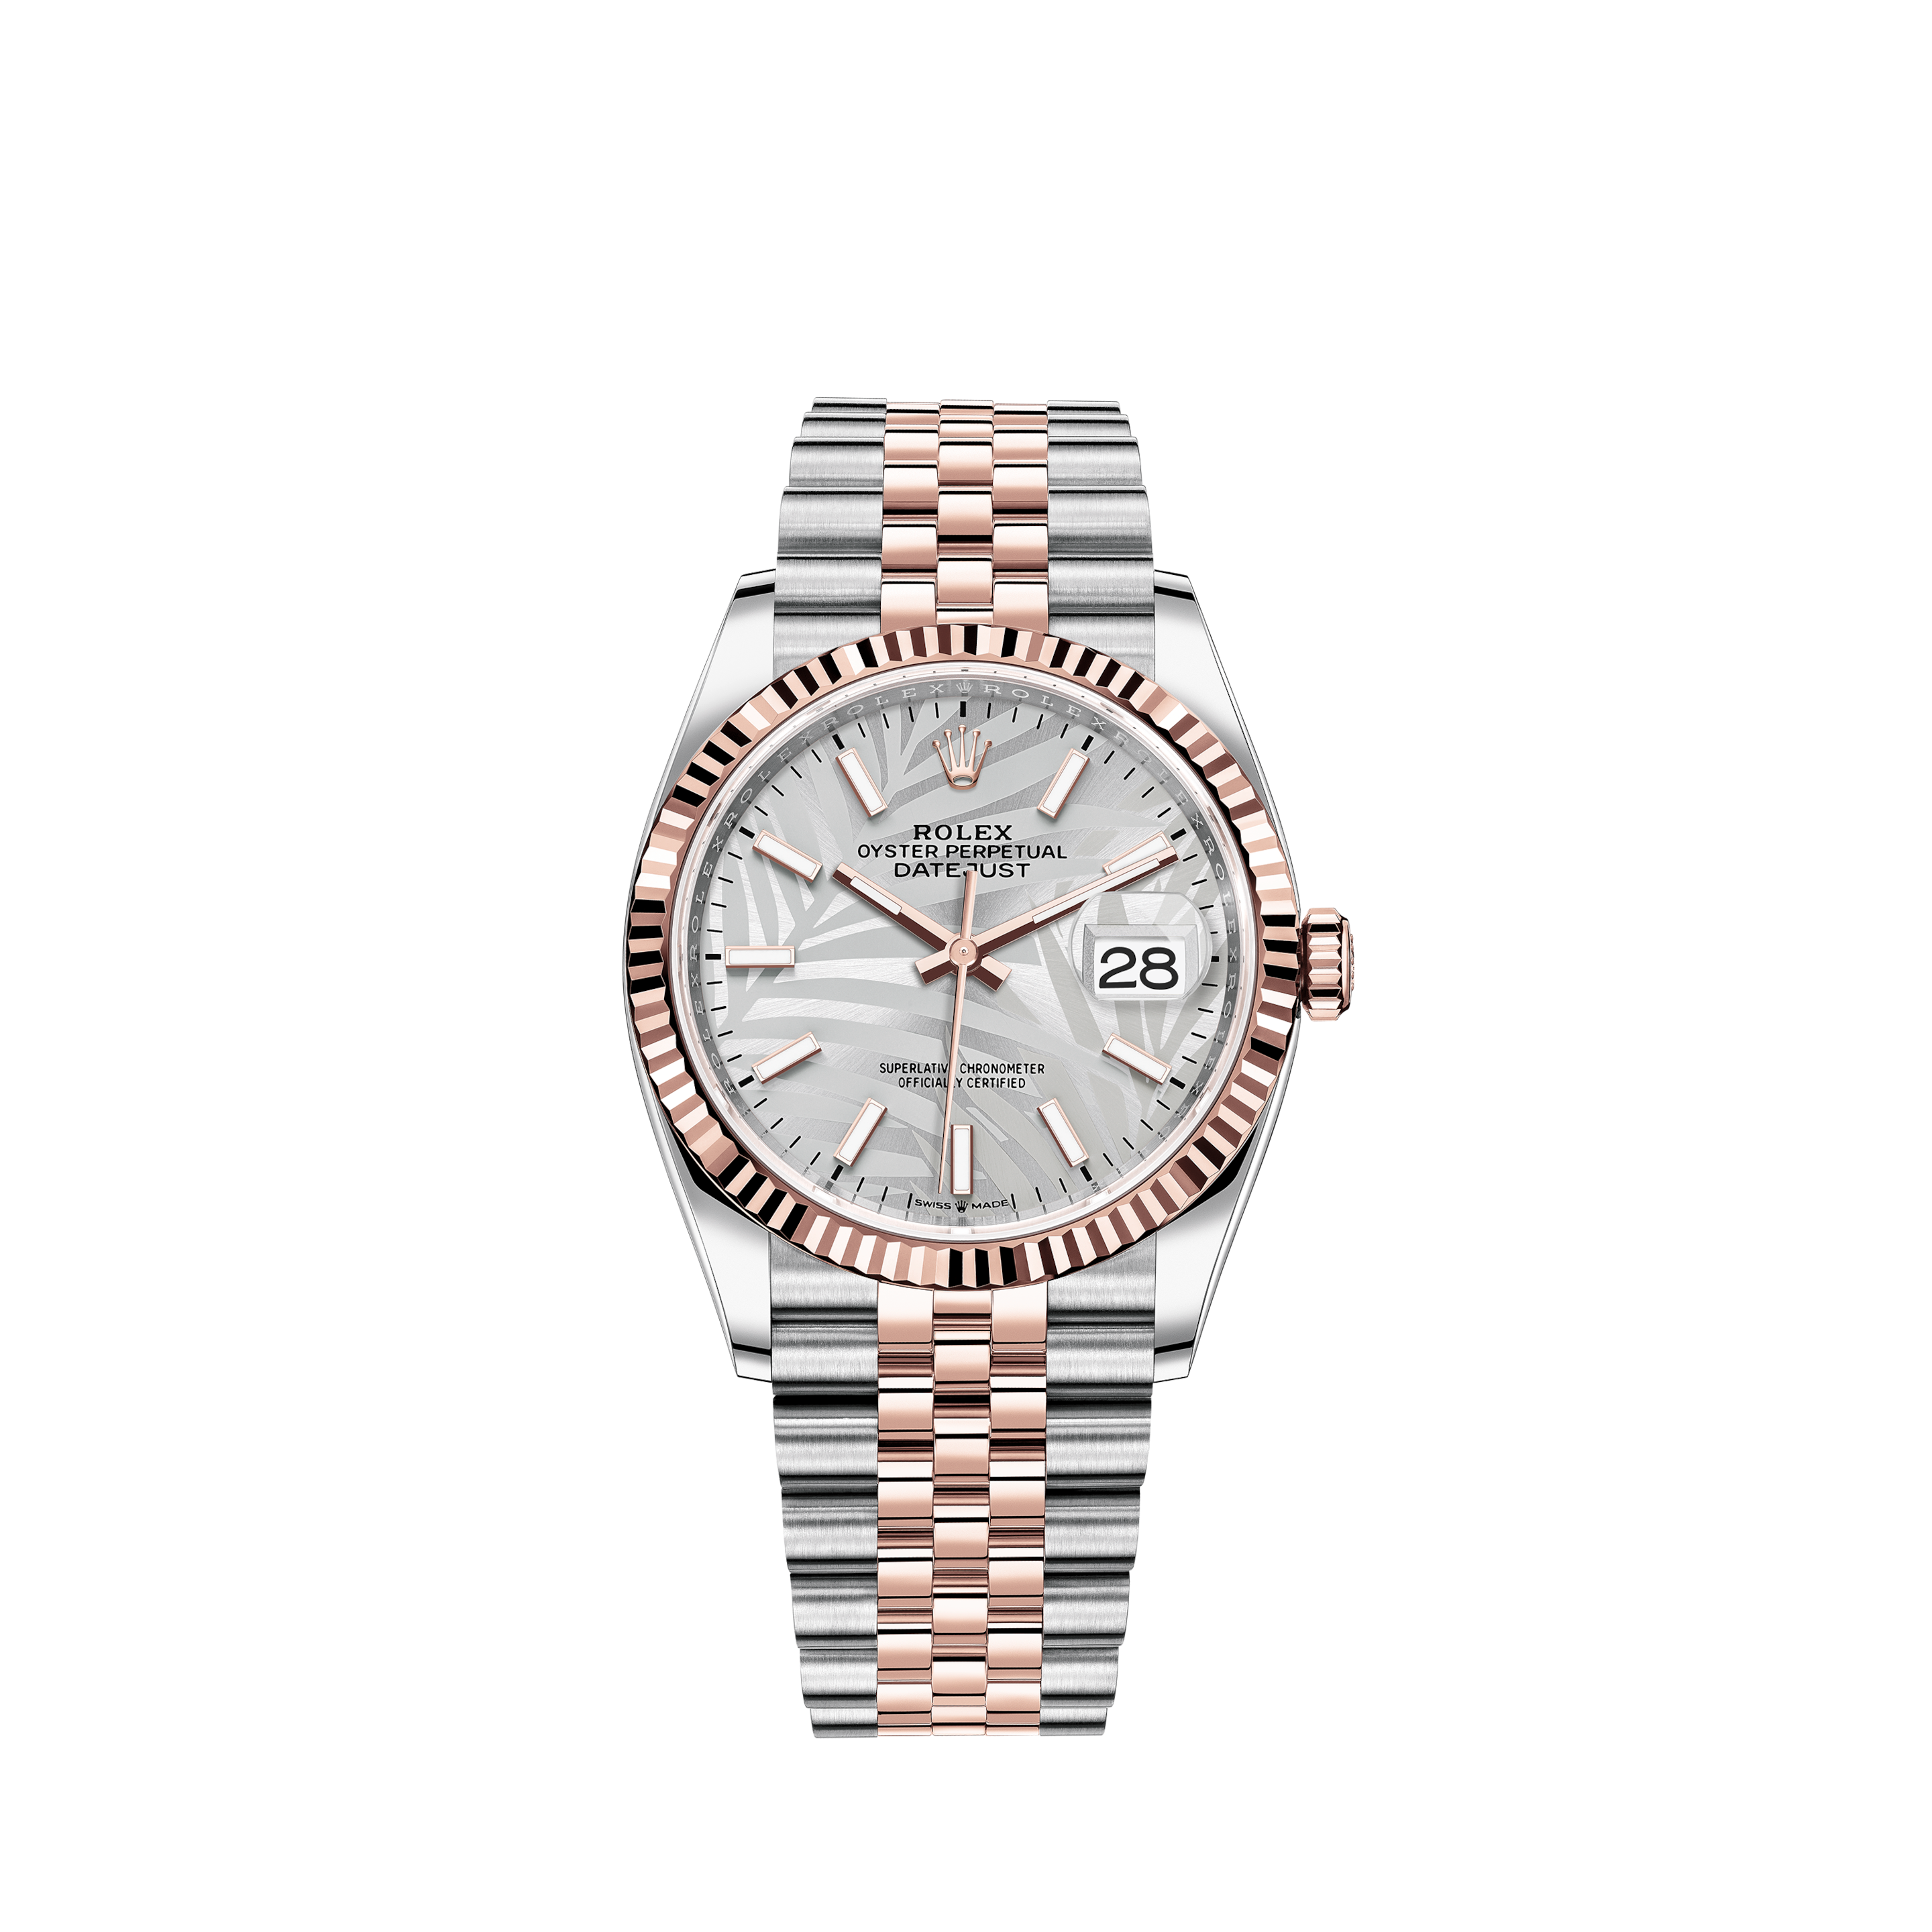 Rolex Ladies Rolex 26mm Datejust Two Tone Vintage Fluted Bezel With Lugs White Color Dial with Accent RRTRolex Ladies Rolex 26mm Datejust Two Tone Vintage Fluted Bezel With Lugs White Color Dial with Accent RT